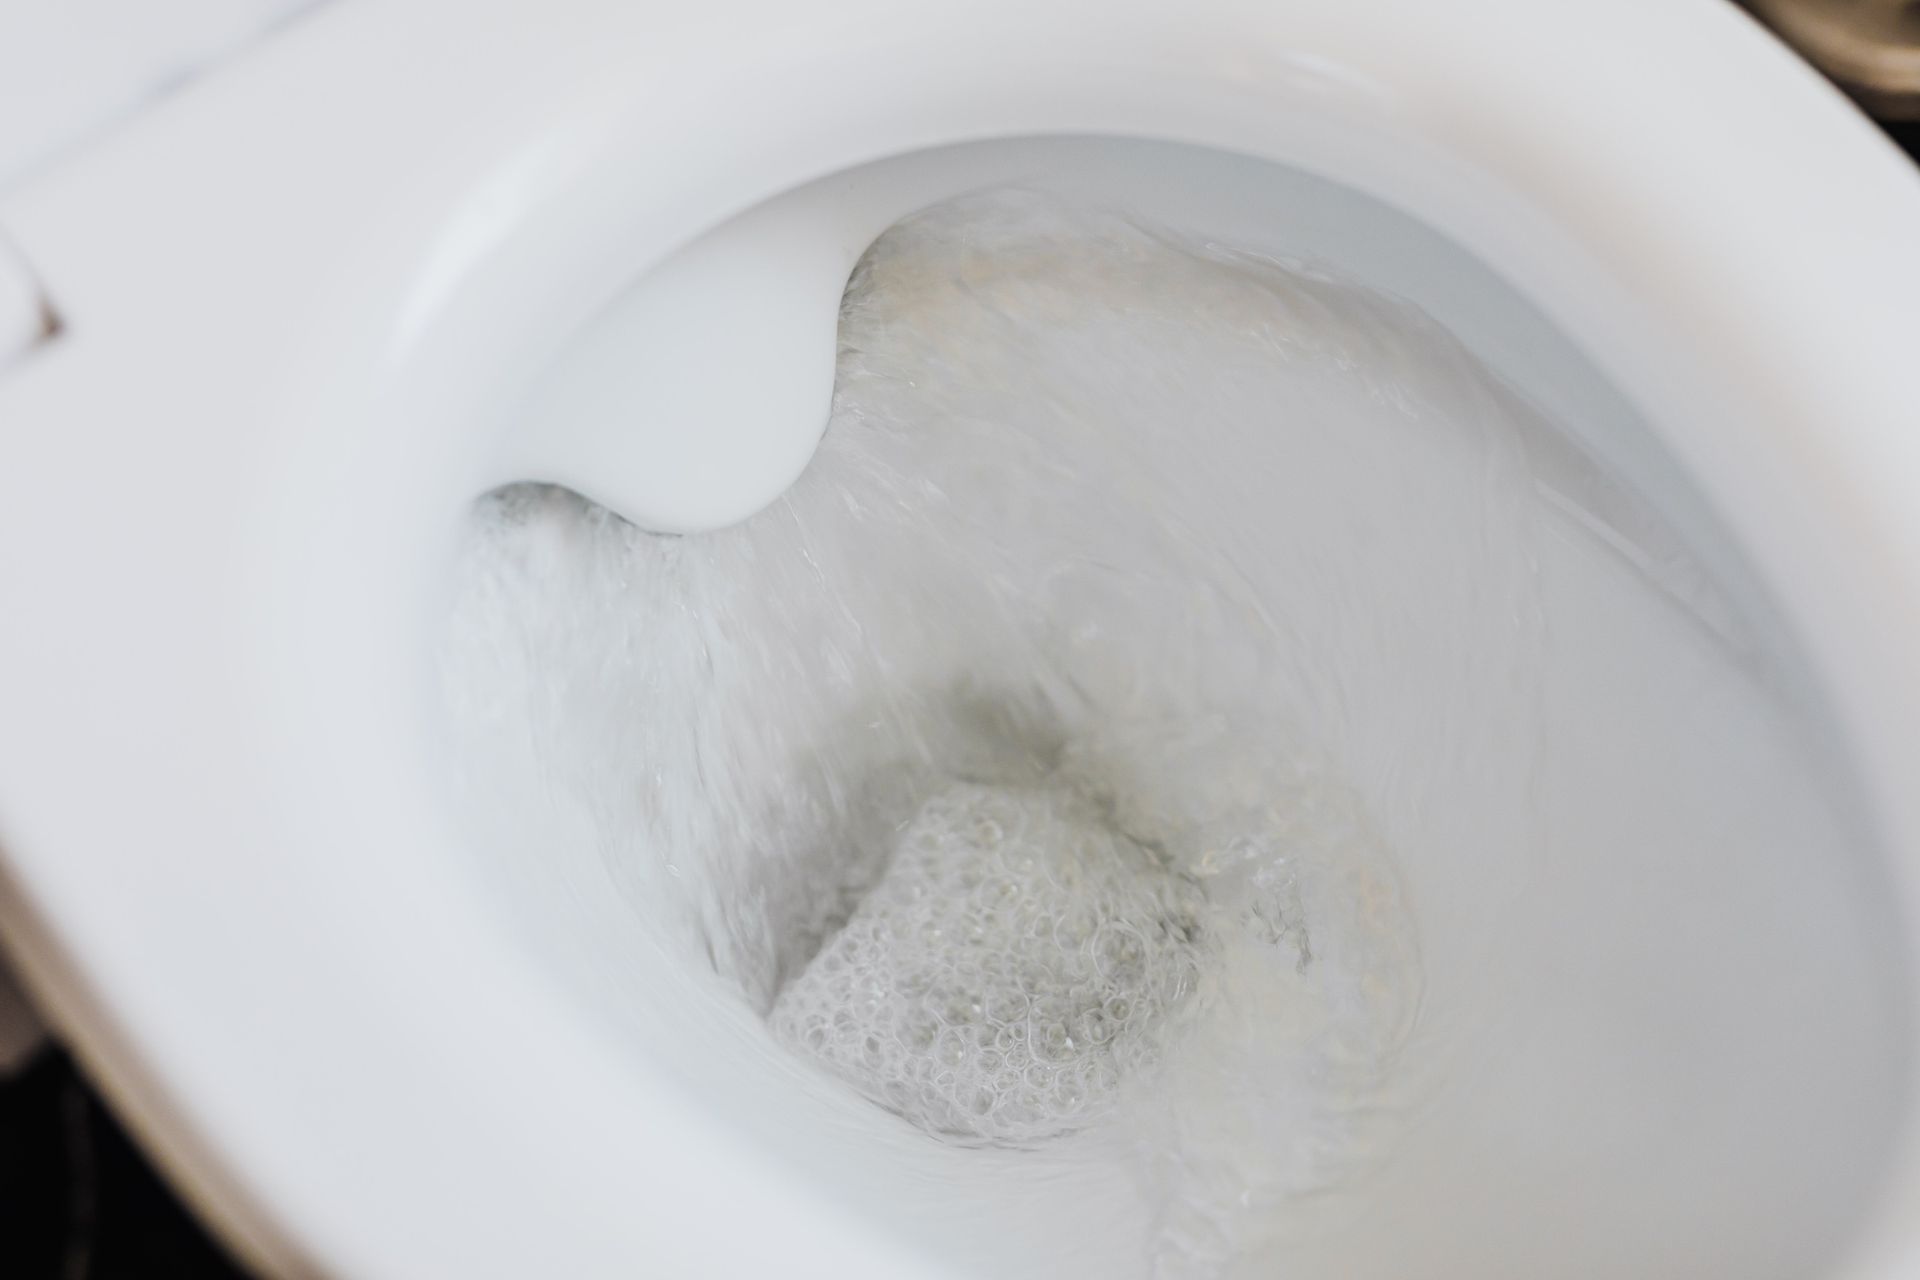 A picture of the inside of a flushing toilet bowl